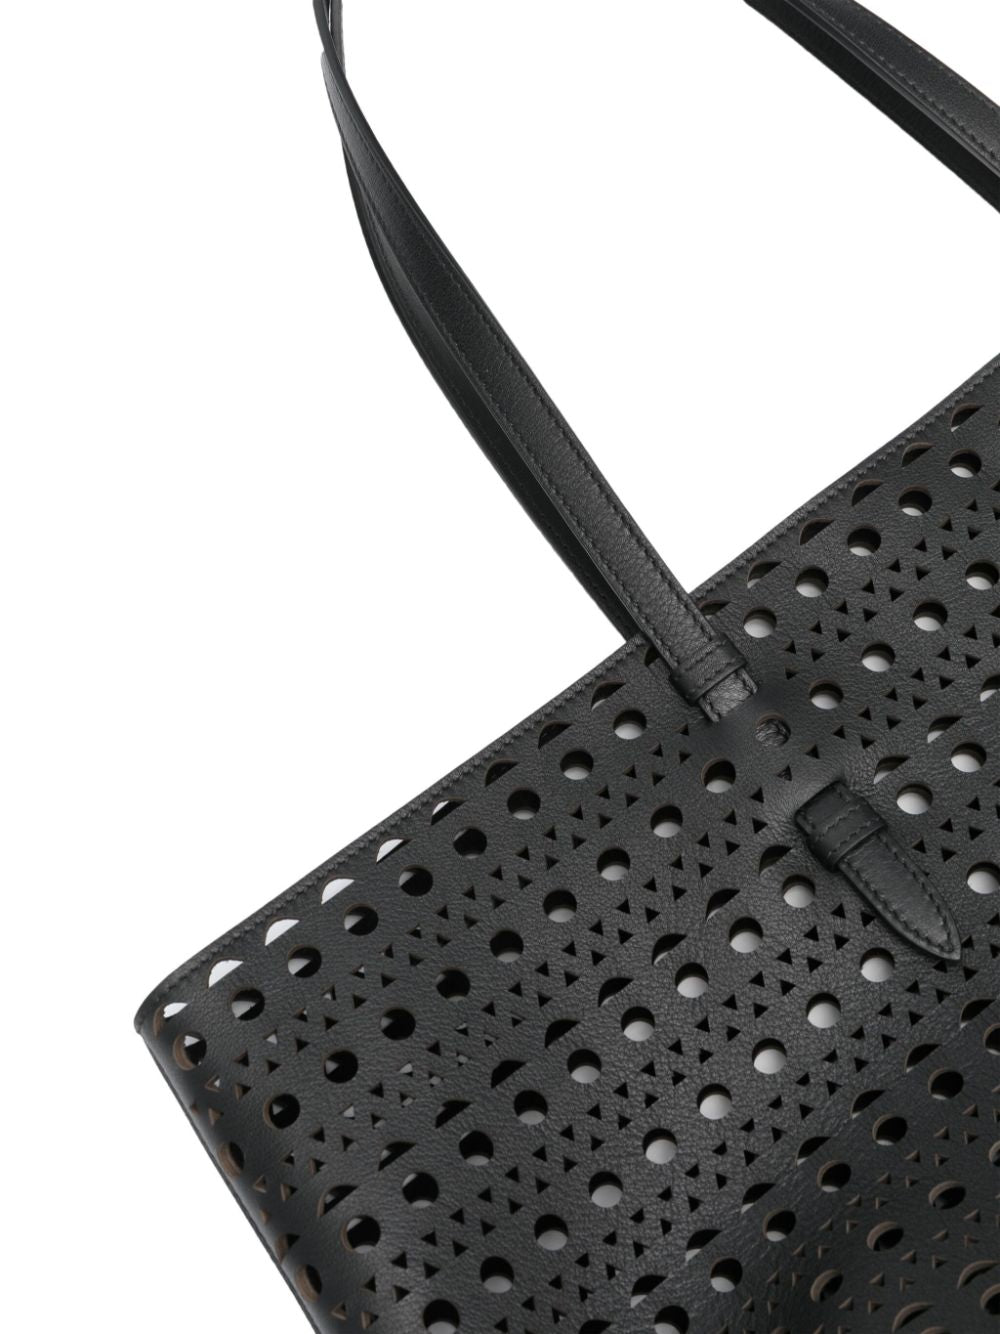 ALAIA Perforated Leather Tote Handbag for Women in Black